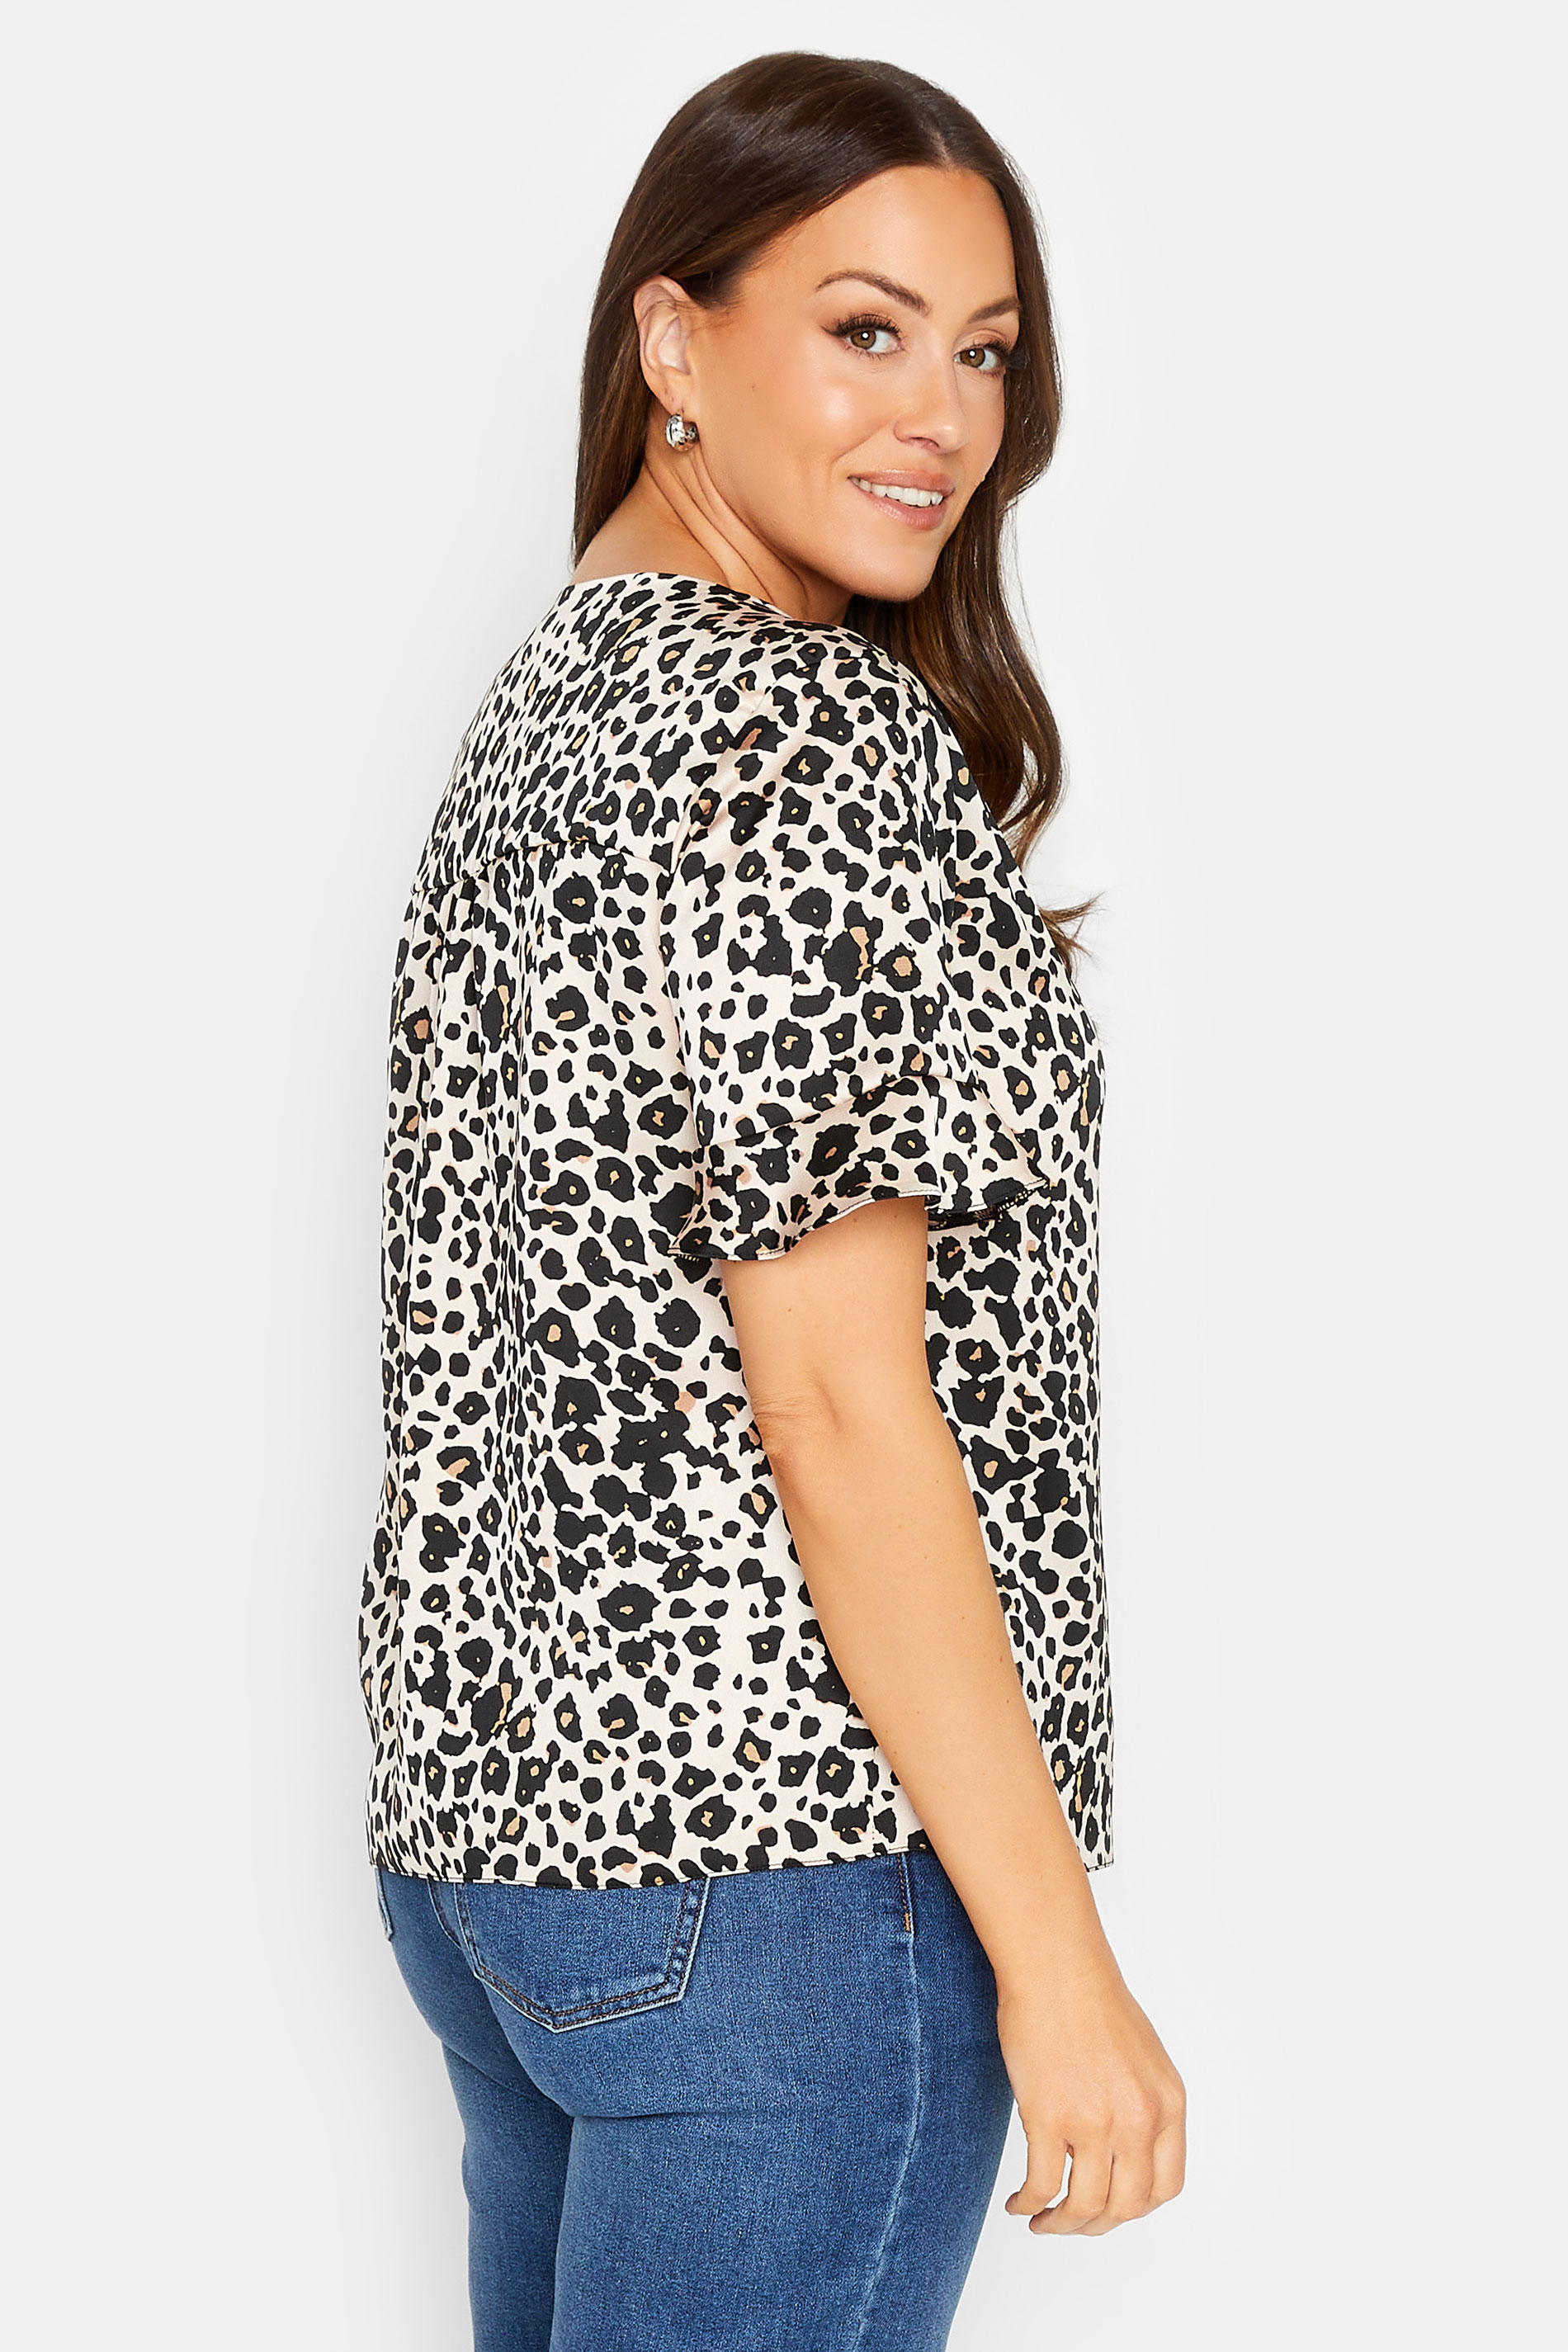 M&Co Natural Leopard Frill Sleeve Blouse | M&Co 3